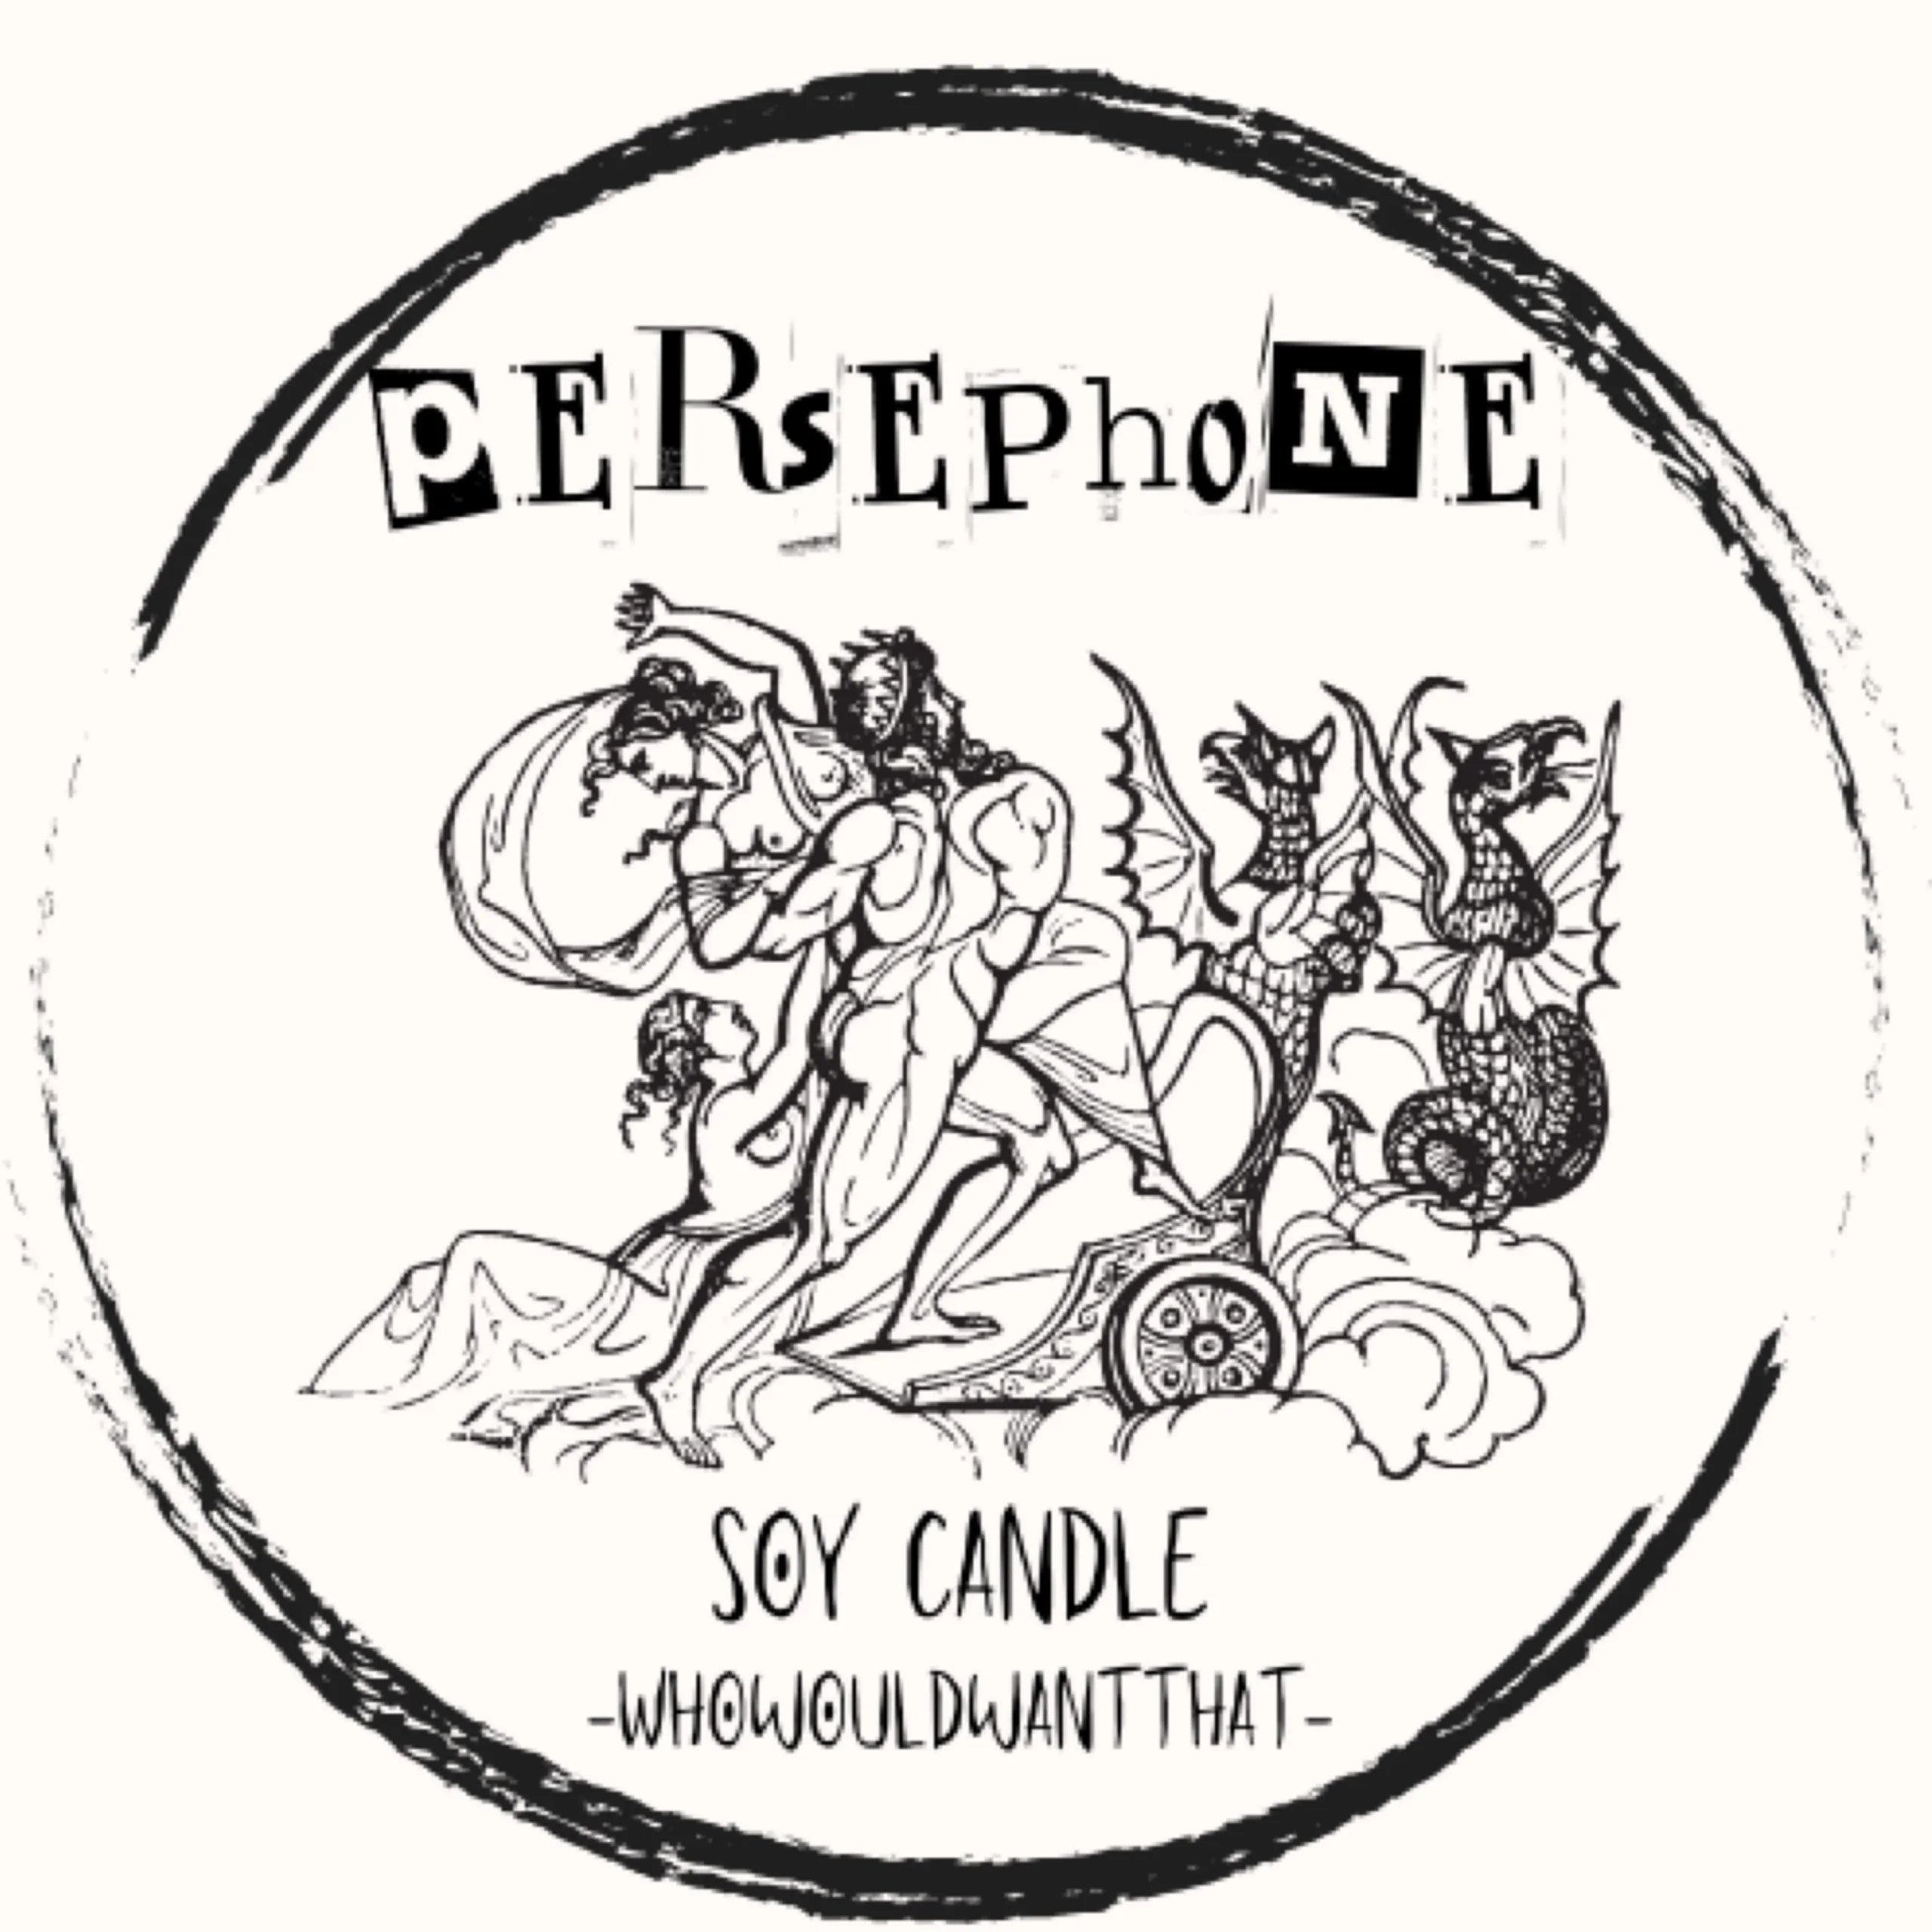 Persephone Candle - 4 oz Scented Soy Candle - Who Would Want That